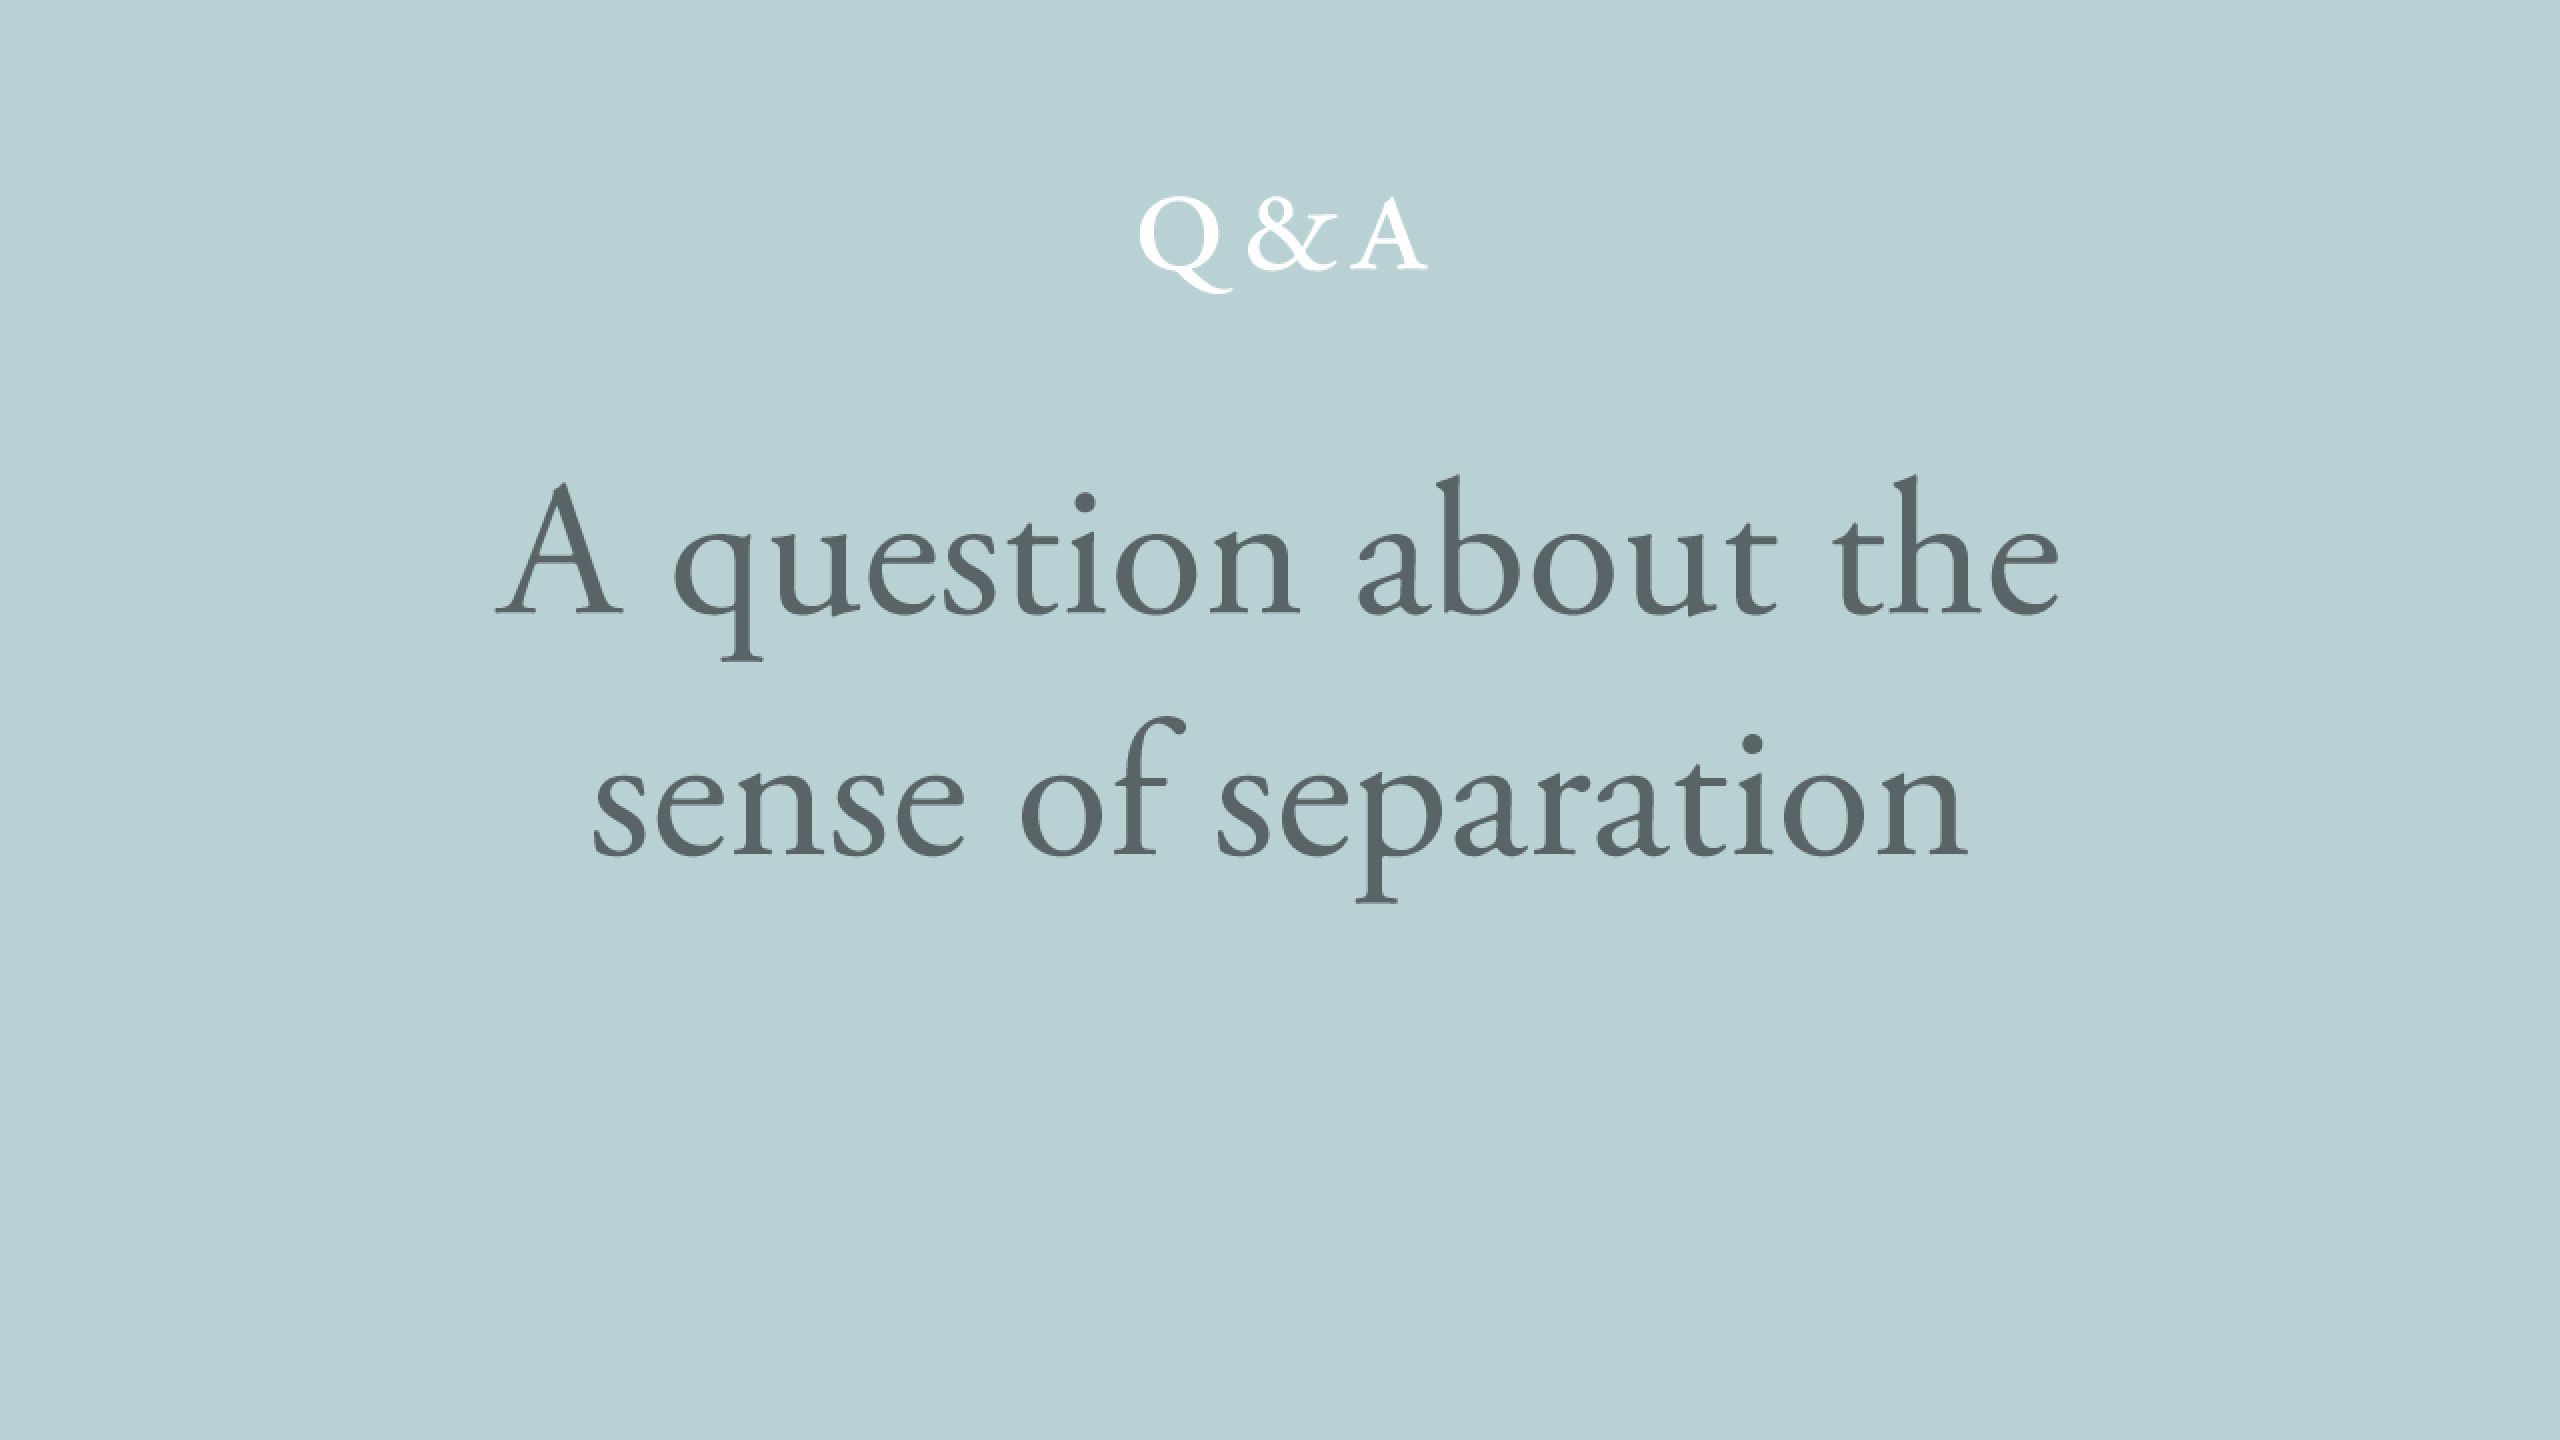 Is it true that the sense of separation cannot exist without an object of comparison?